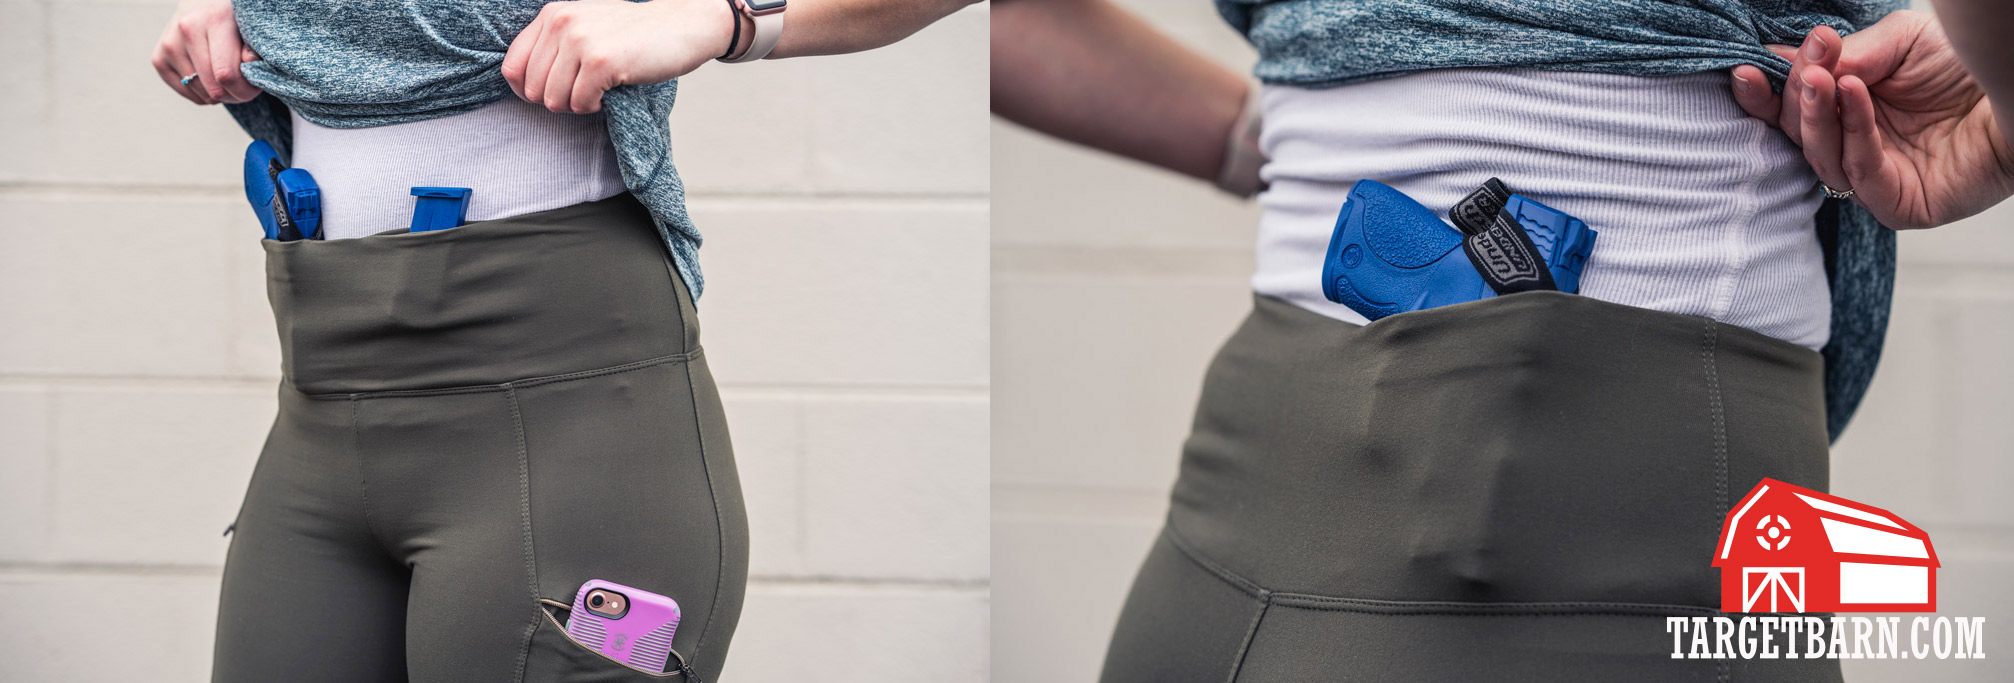 front view and back view of the Undertech Undercover concealed carry zip pocket leggings with blue guns and magazines